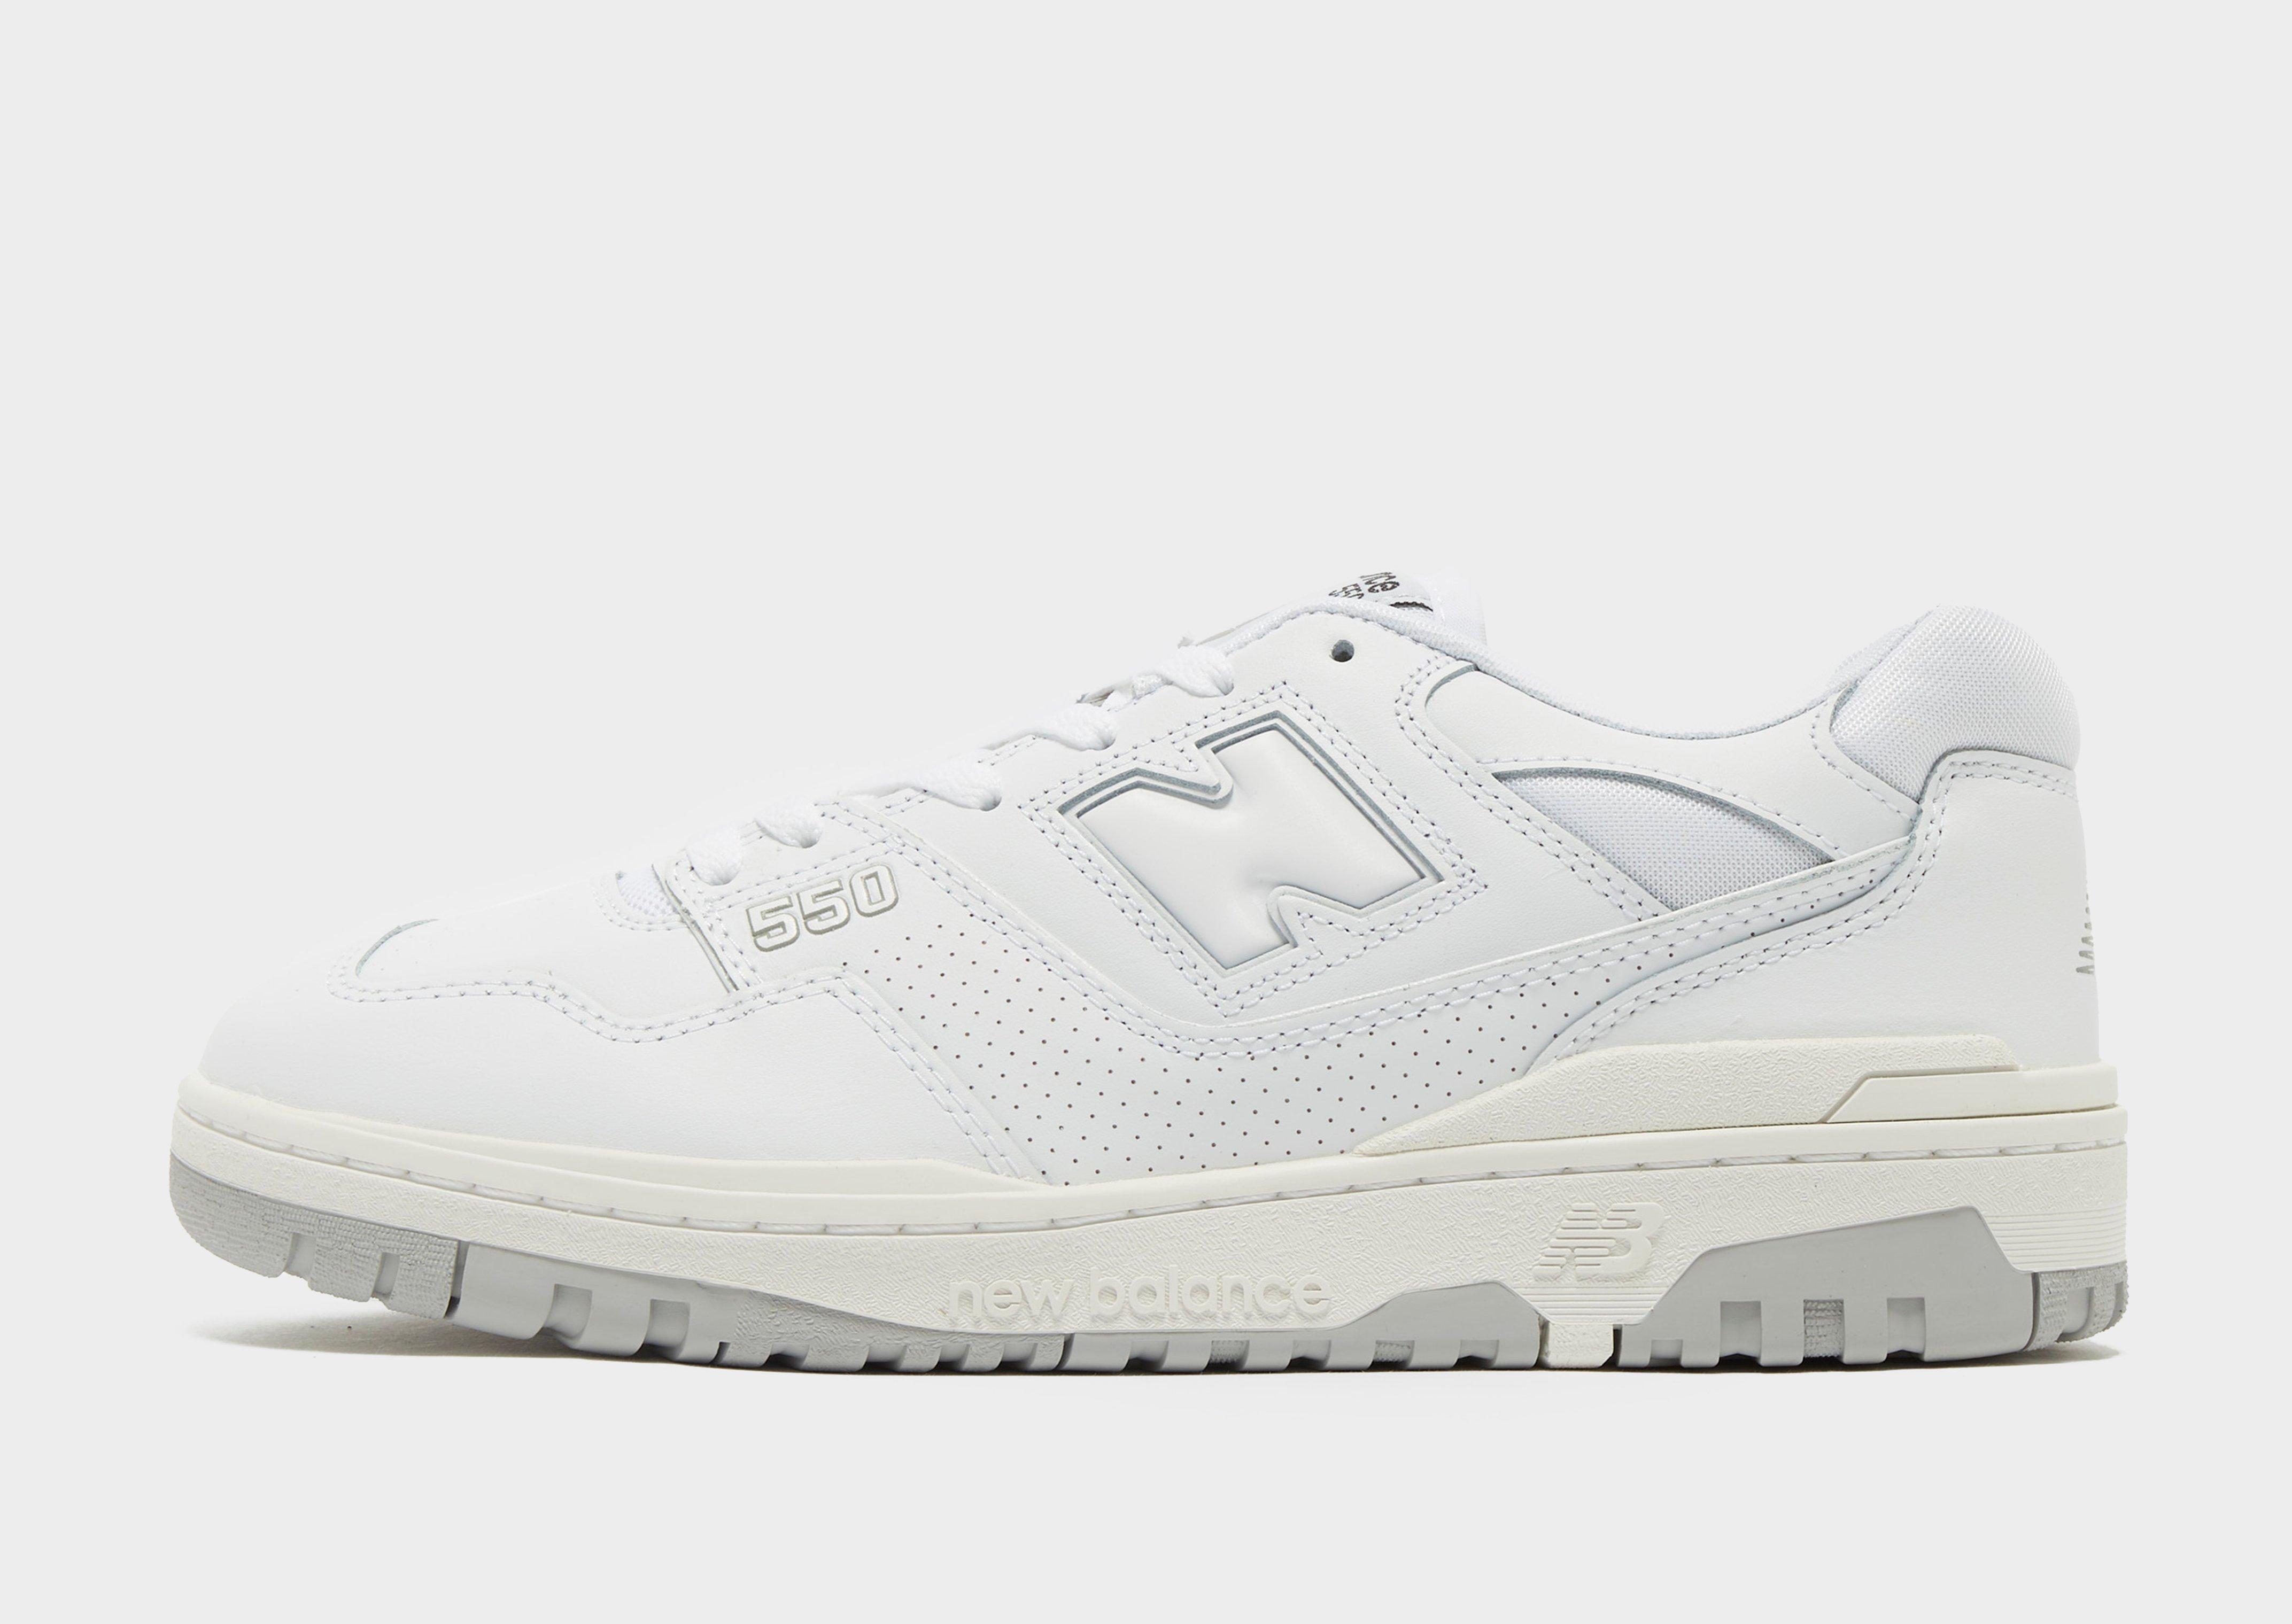 Everything You Need to Know About the New Balance 550 - KLEKT Blog